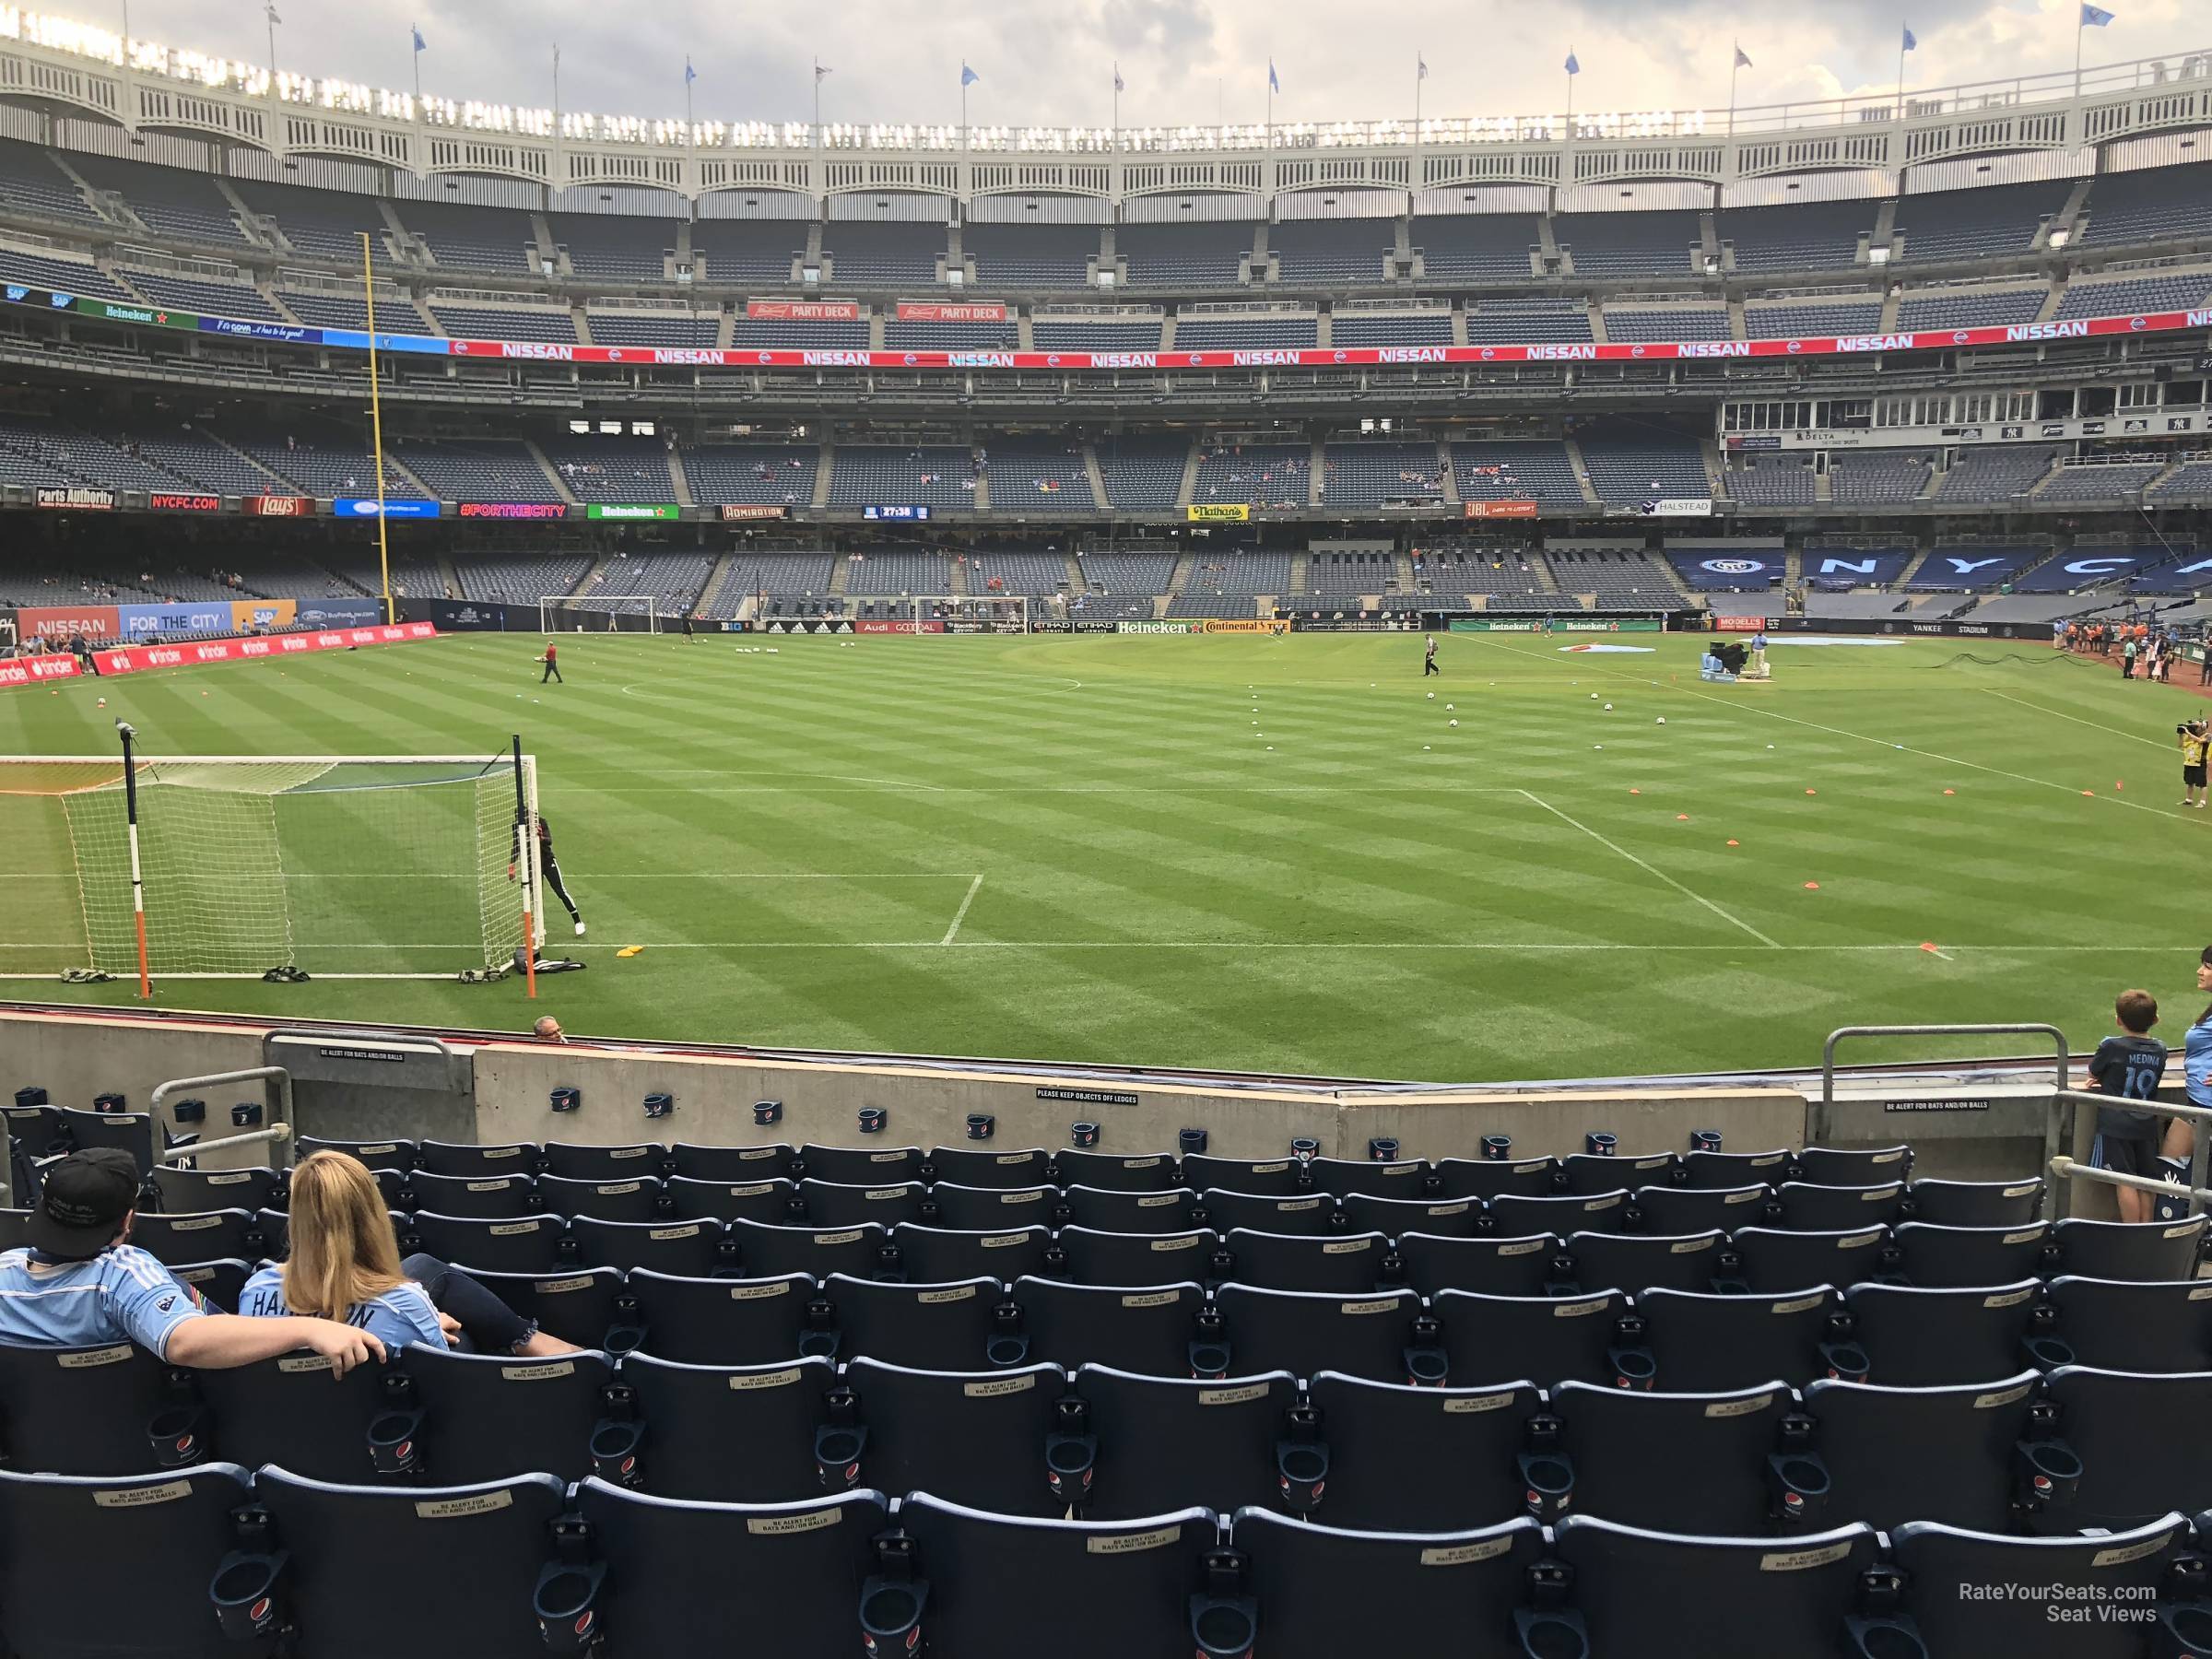 section 134, row 10 seat view  for soccer - yankee stadium